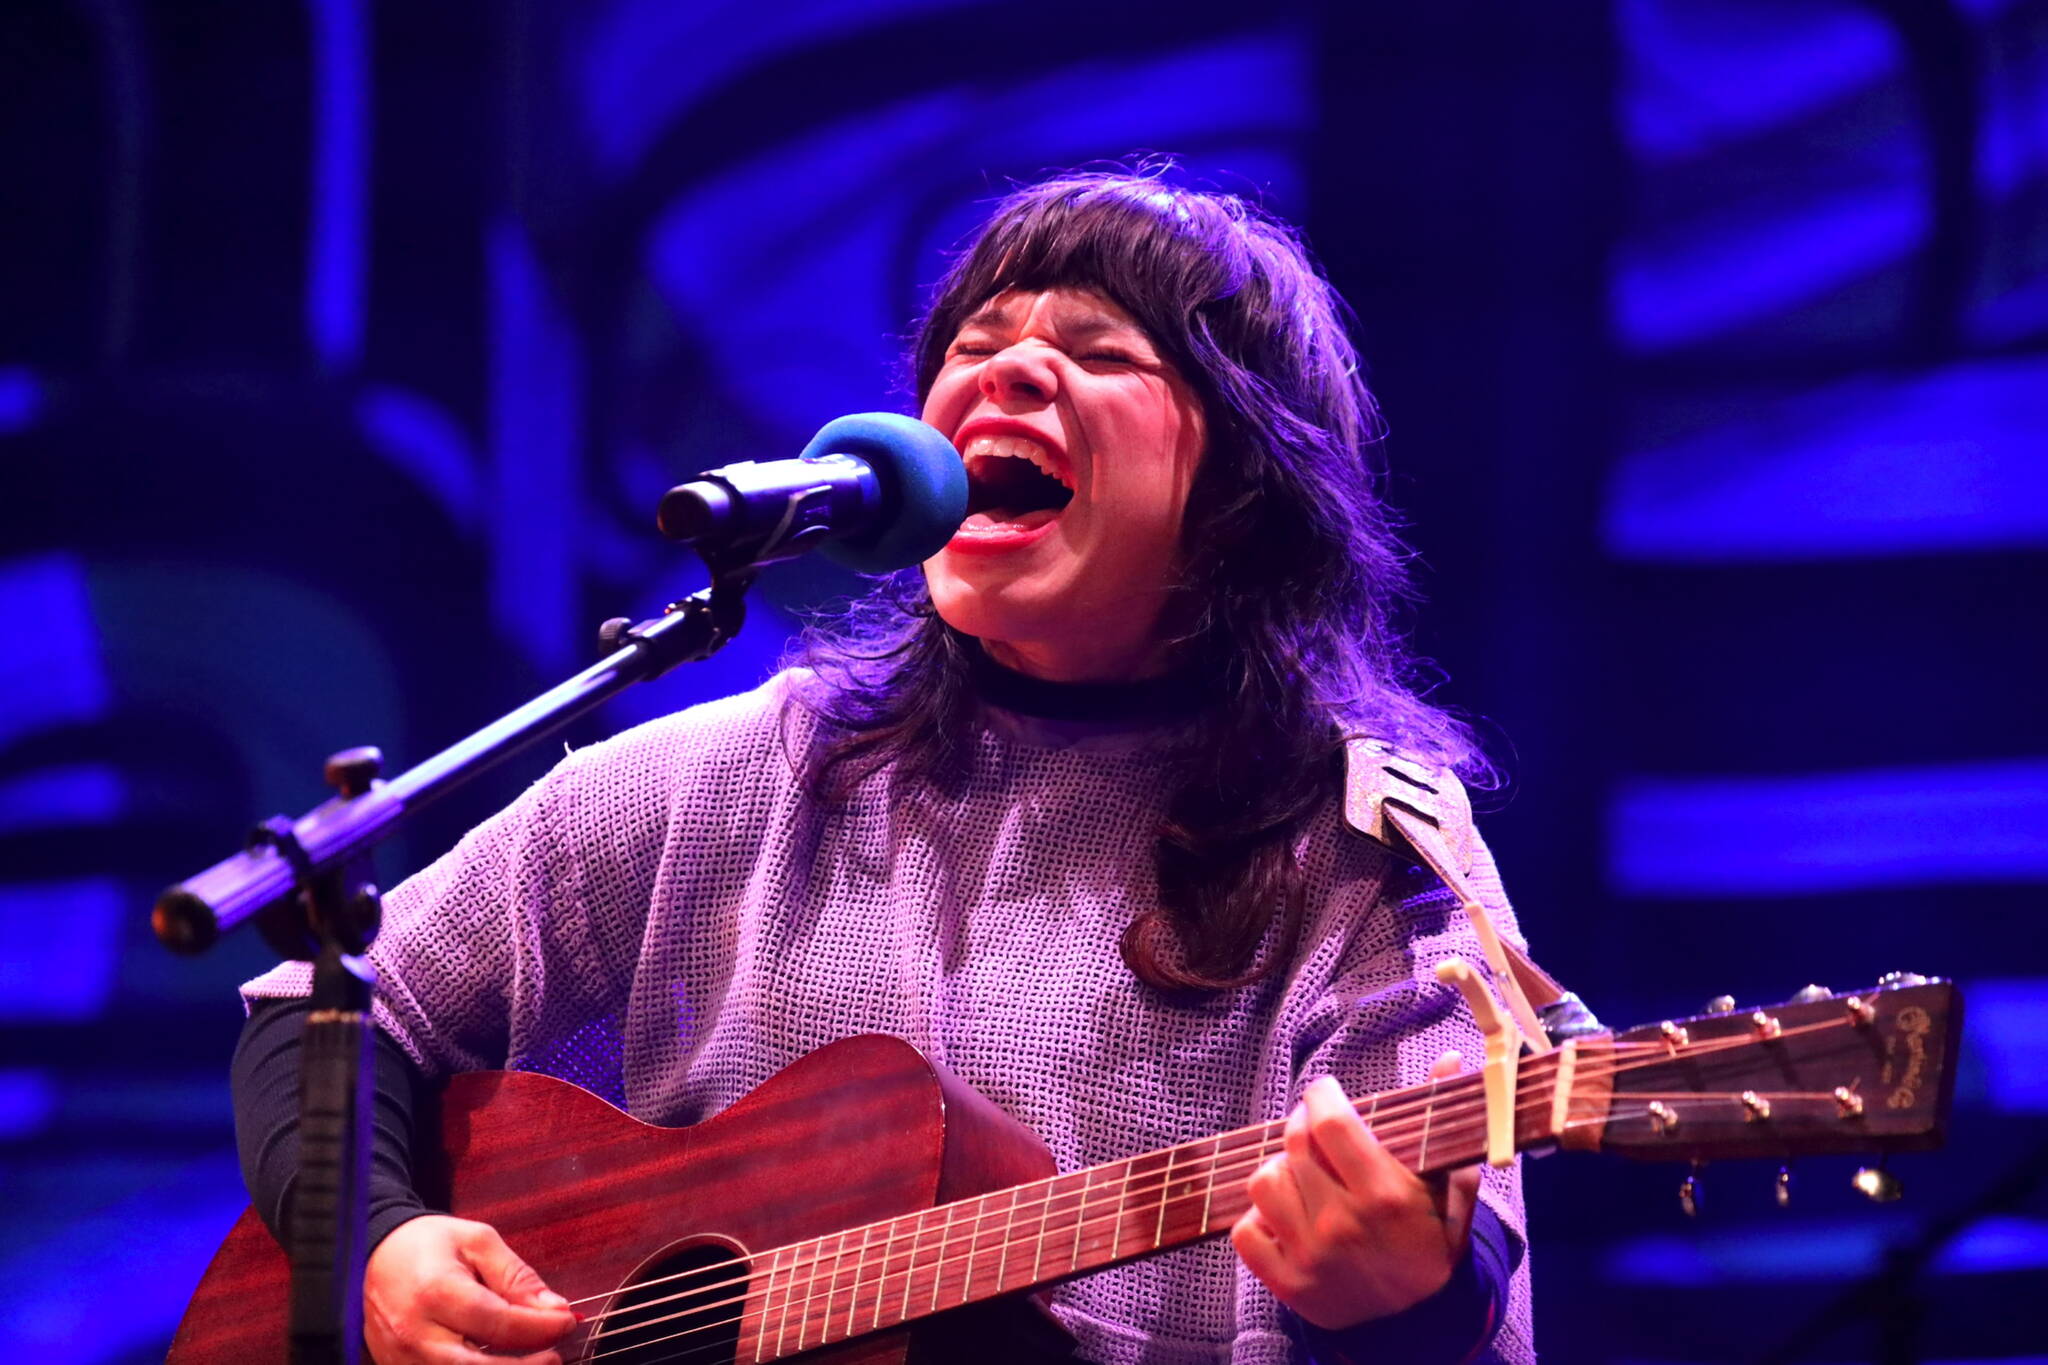 Samantha Crain, of the Choctaw Nation, sings to the crowd during a performance Thursday night as part of the Áak’w Rock music festival at Centennial Hall. (Clarise Larson / Juneau Empire)